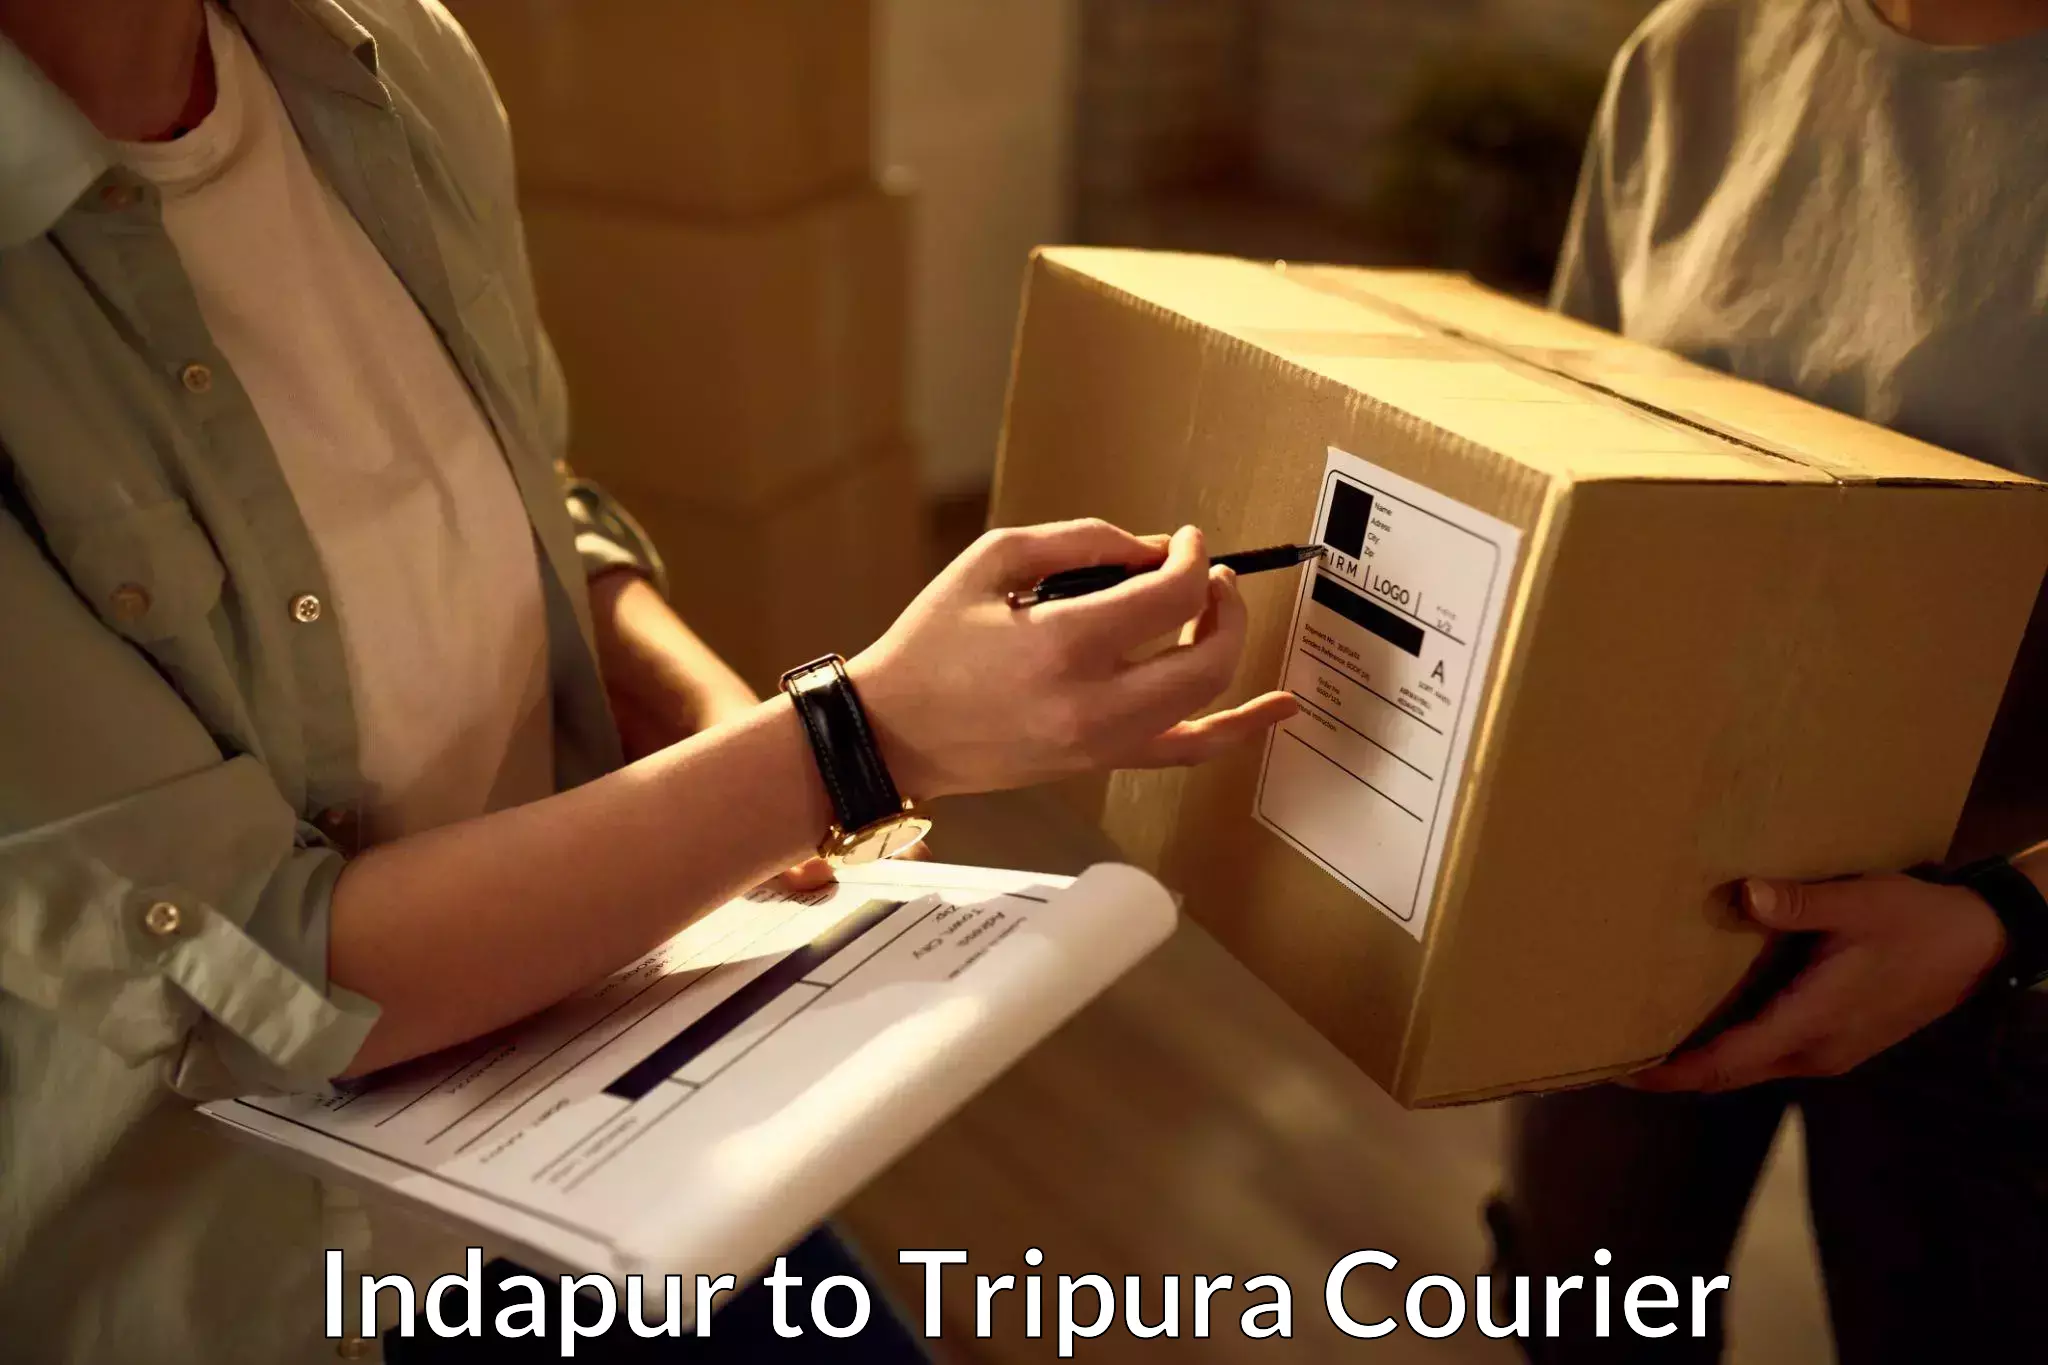 User-friendly courier app Indapur to Tripura